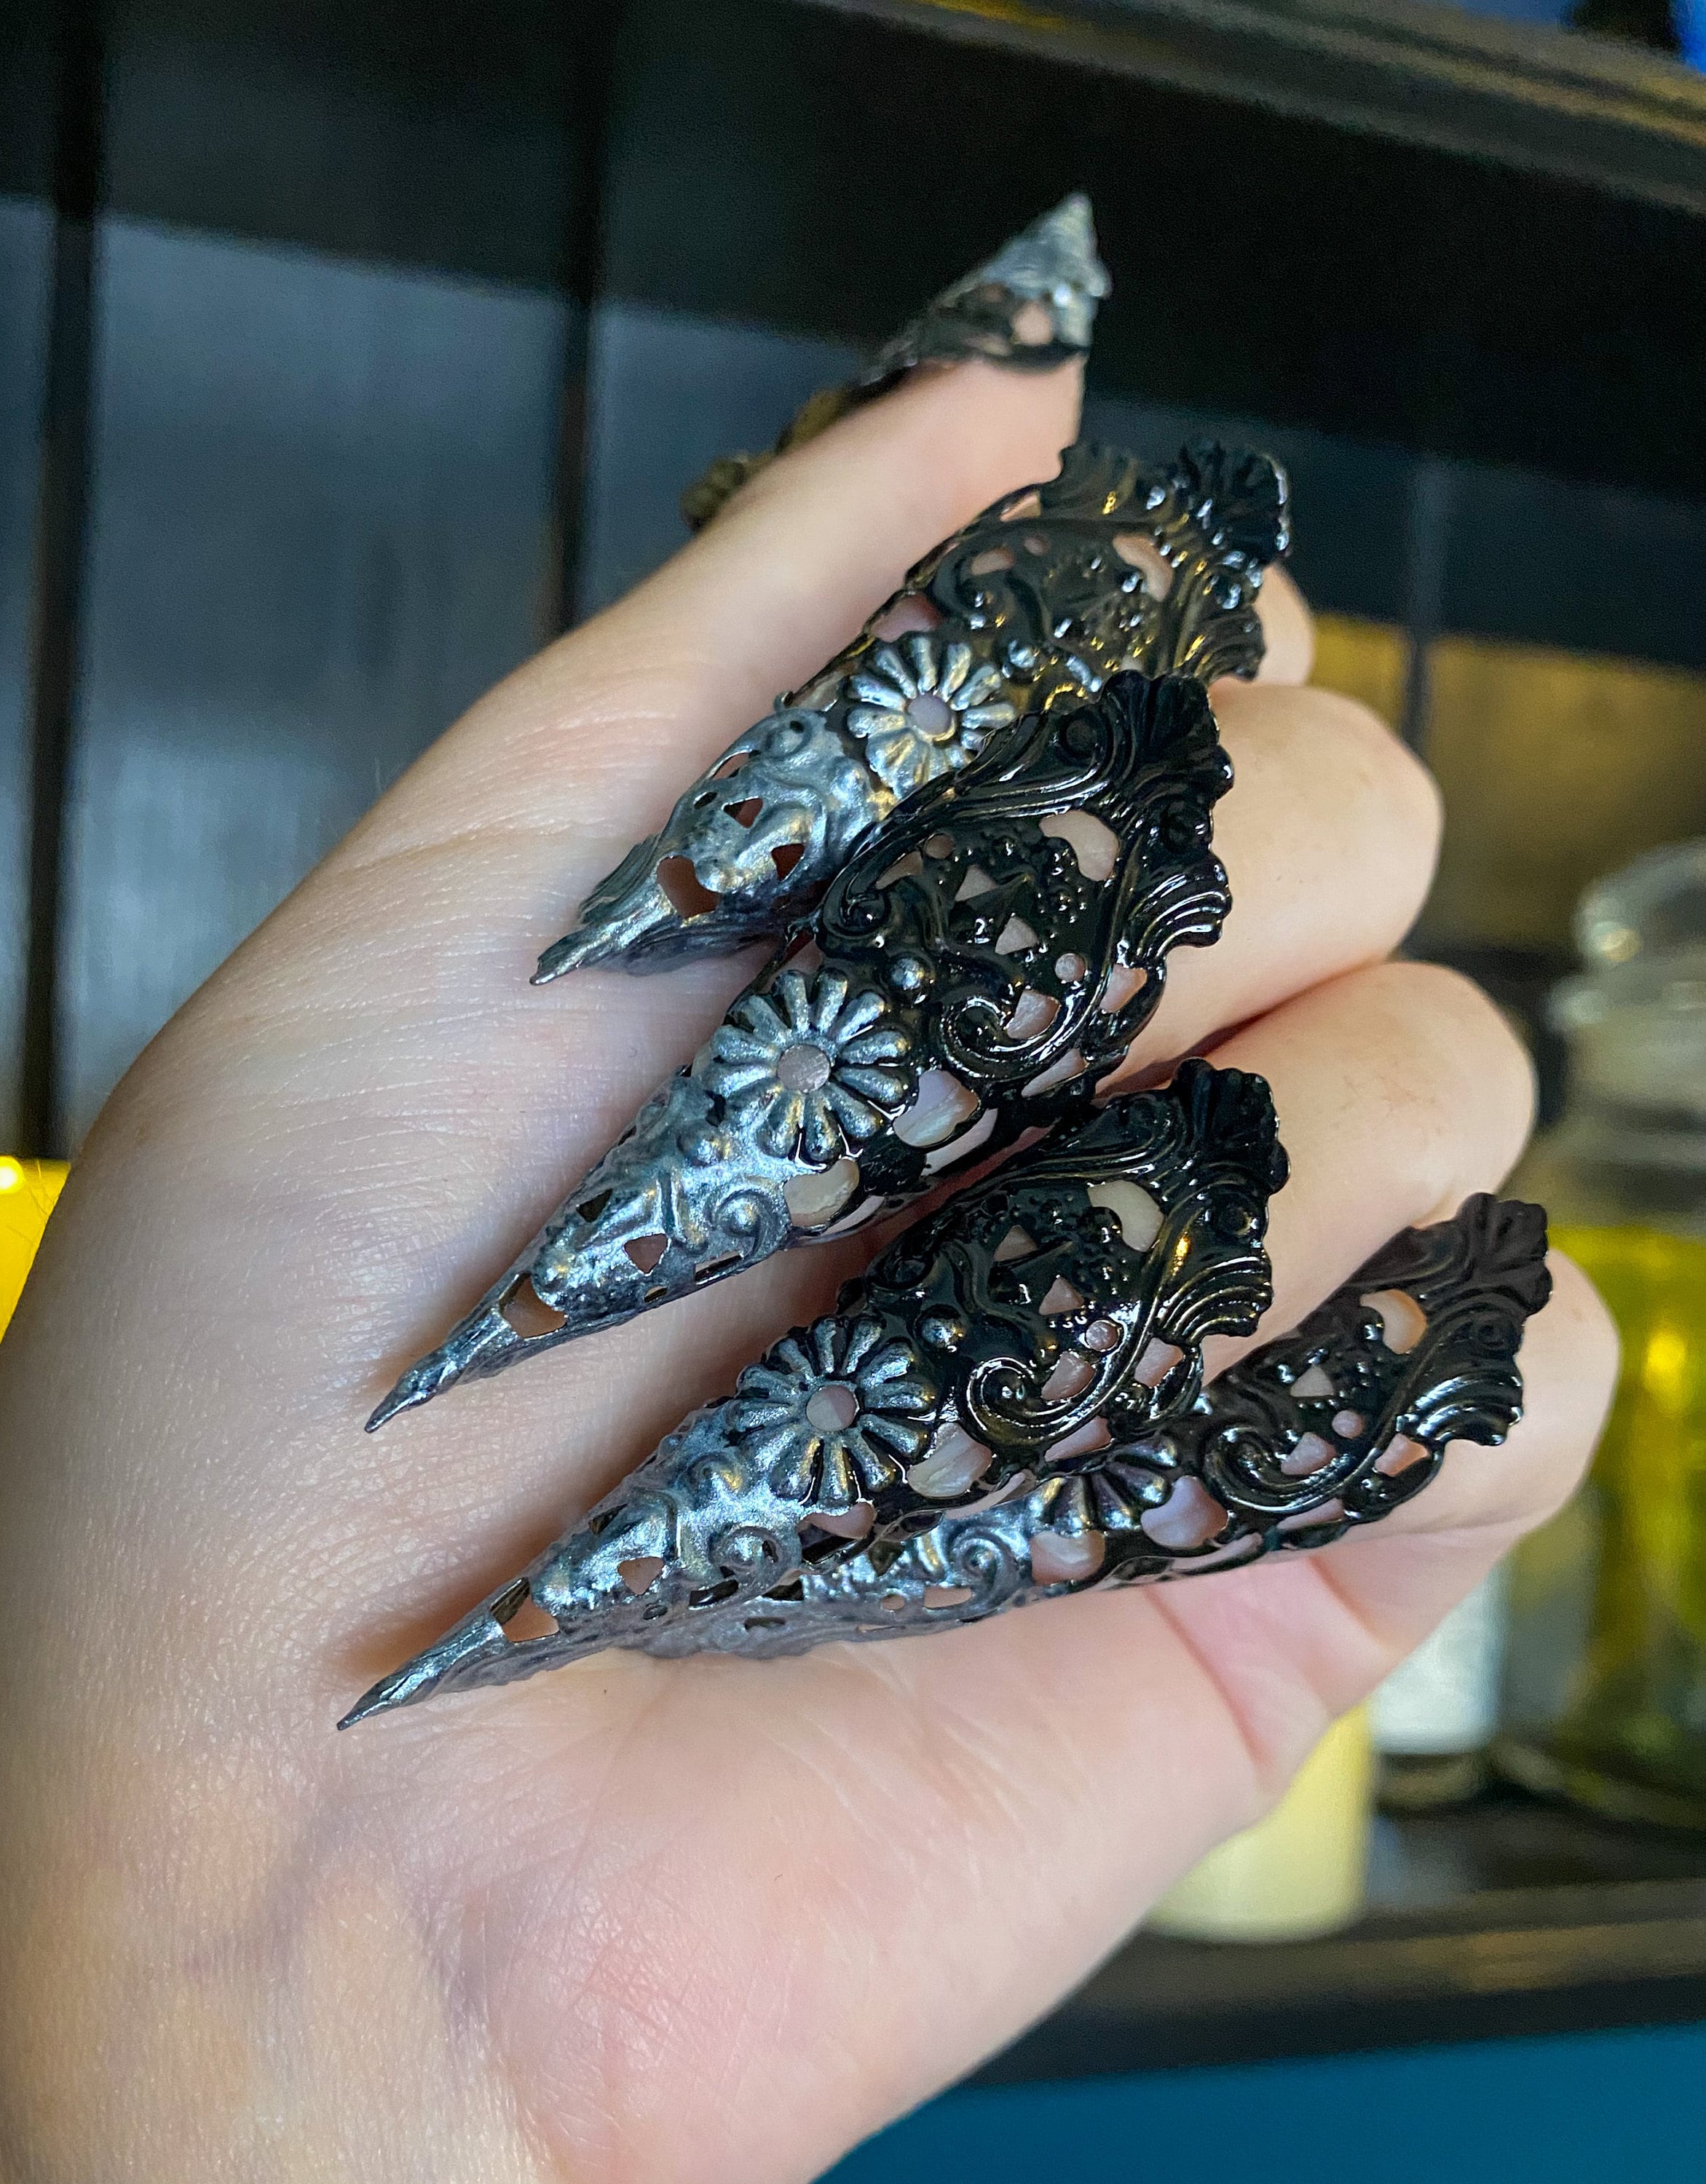 Small Claw Rings Nail Jewellery Nail Bite Prevention Goth Jewelry